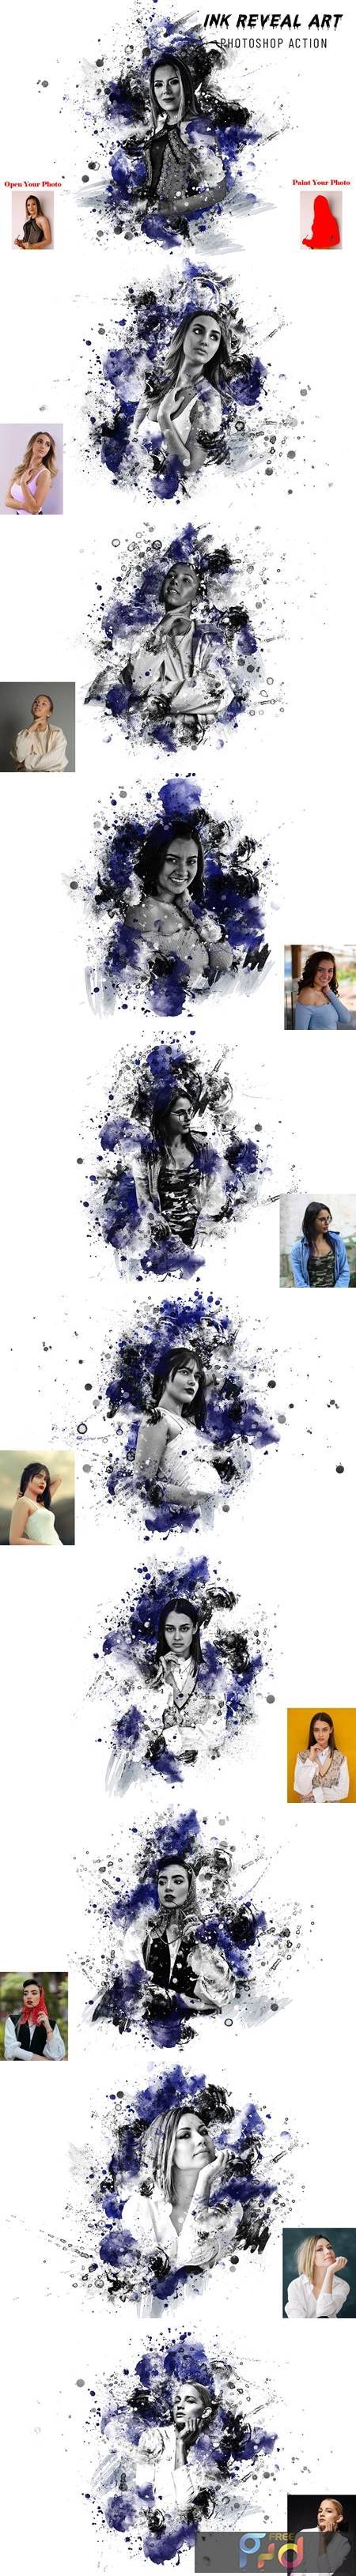 Ink Reveal Art Photoshop Action 7095170 1